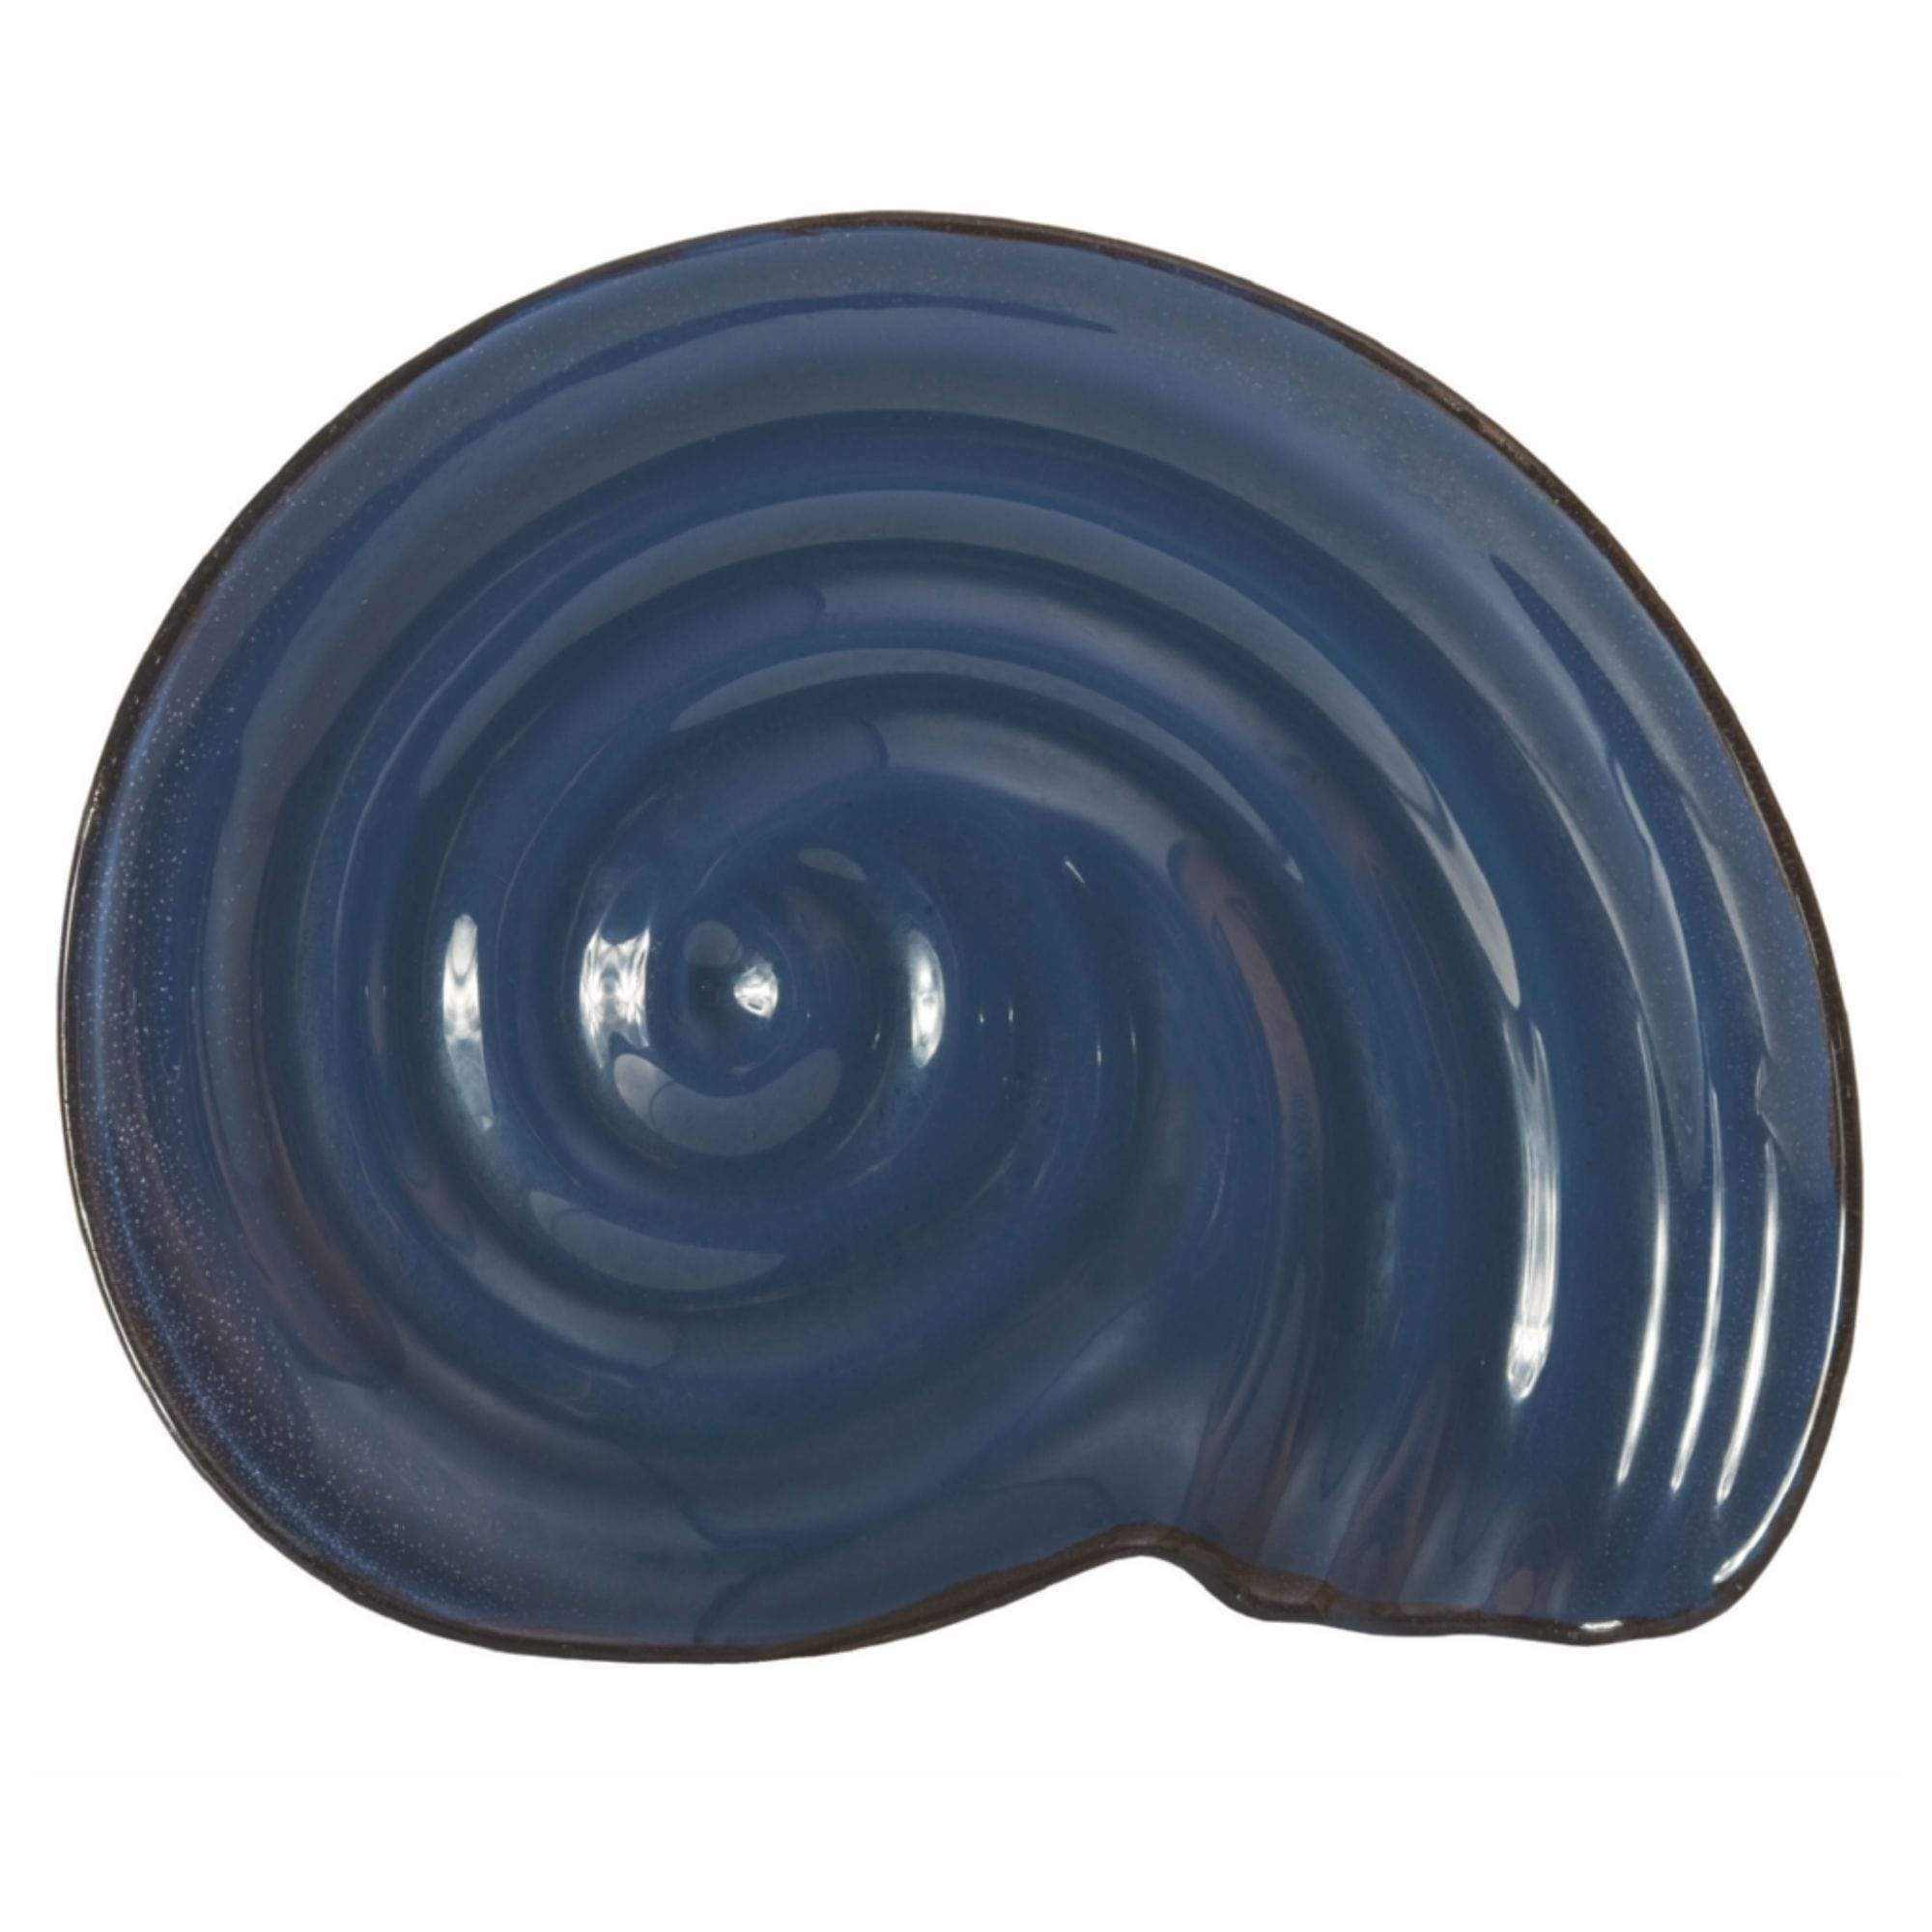 Shell Dishes – Pair of Ceramic Dishes